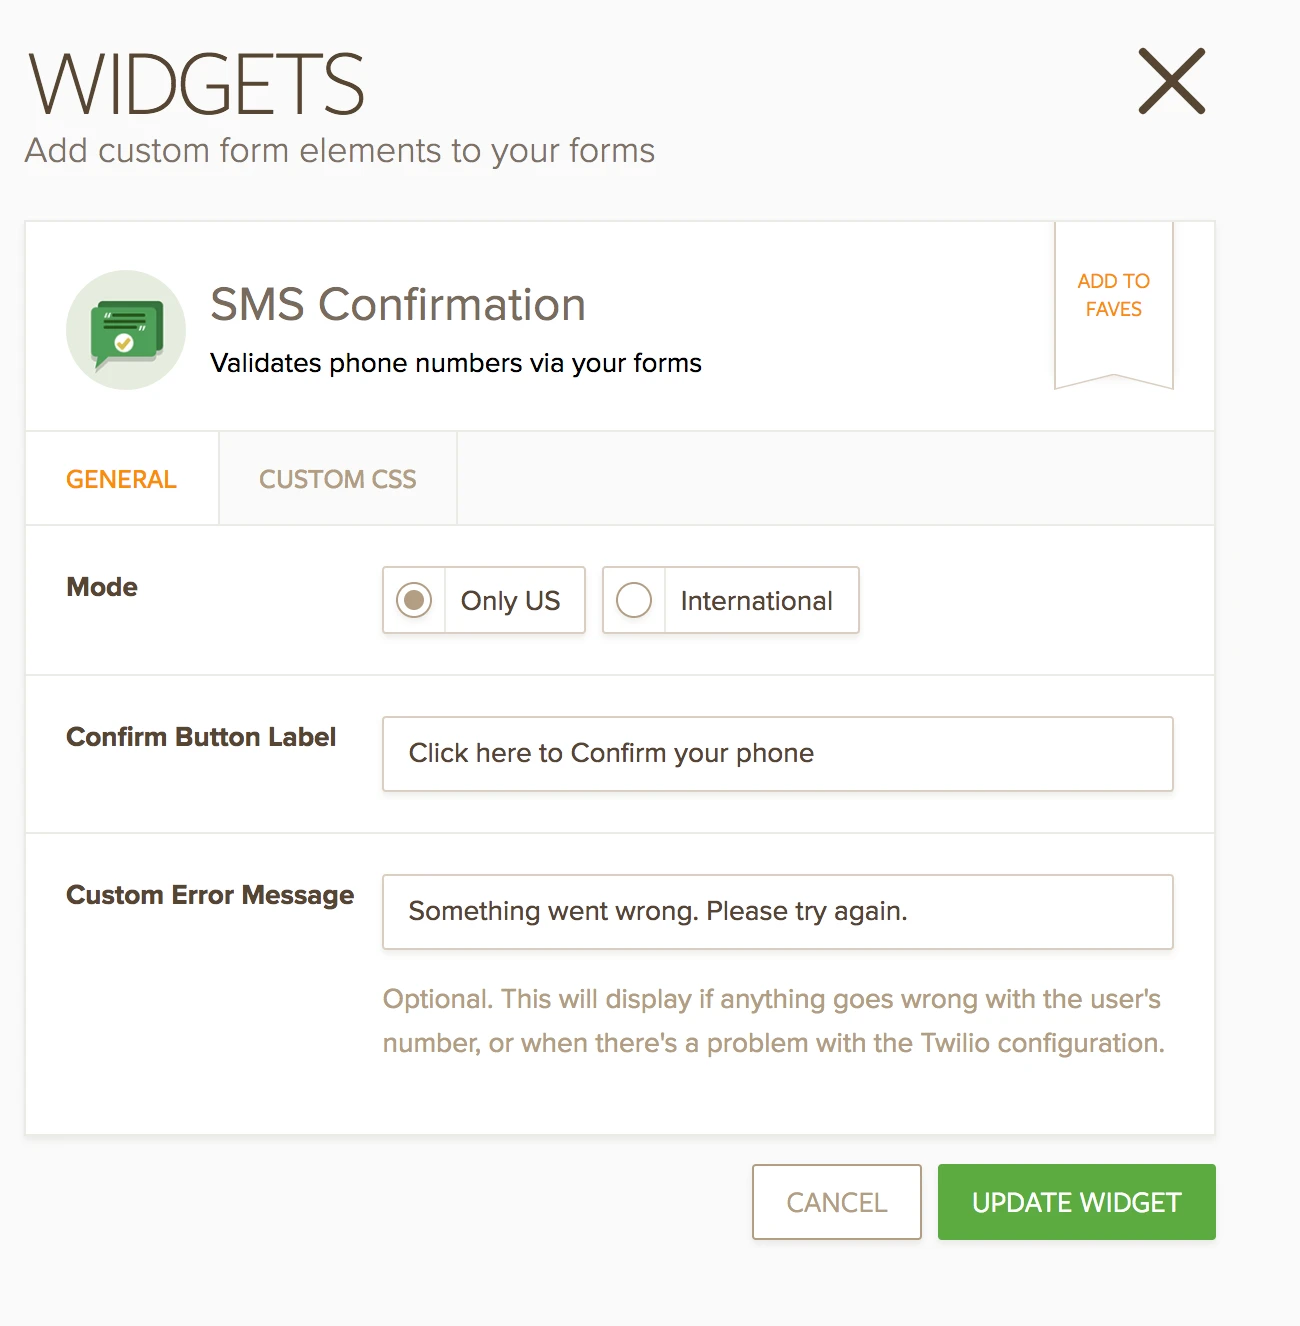 The SMS Confirmation widget does not have any fields to enter credentials during setup Image 1 Screenshot 40